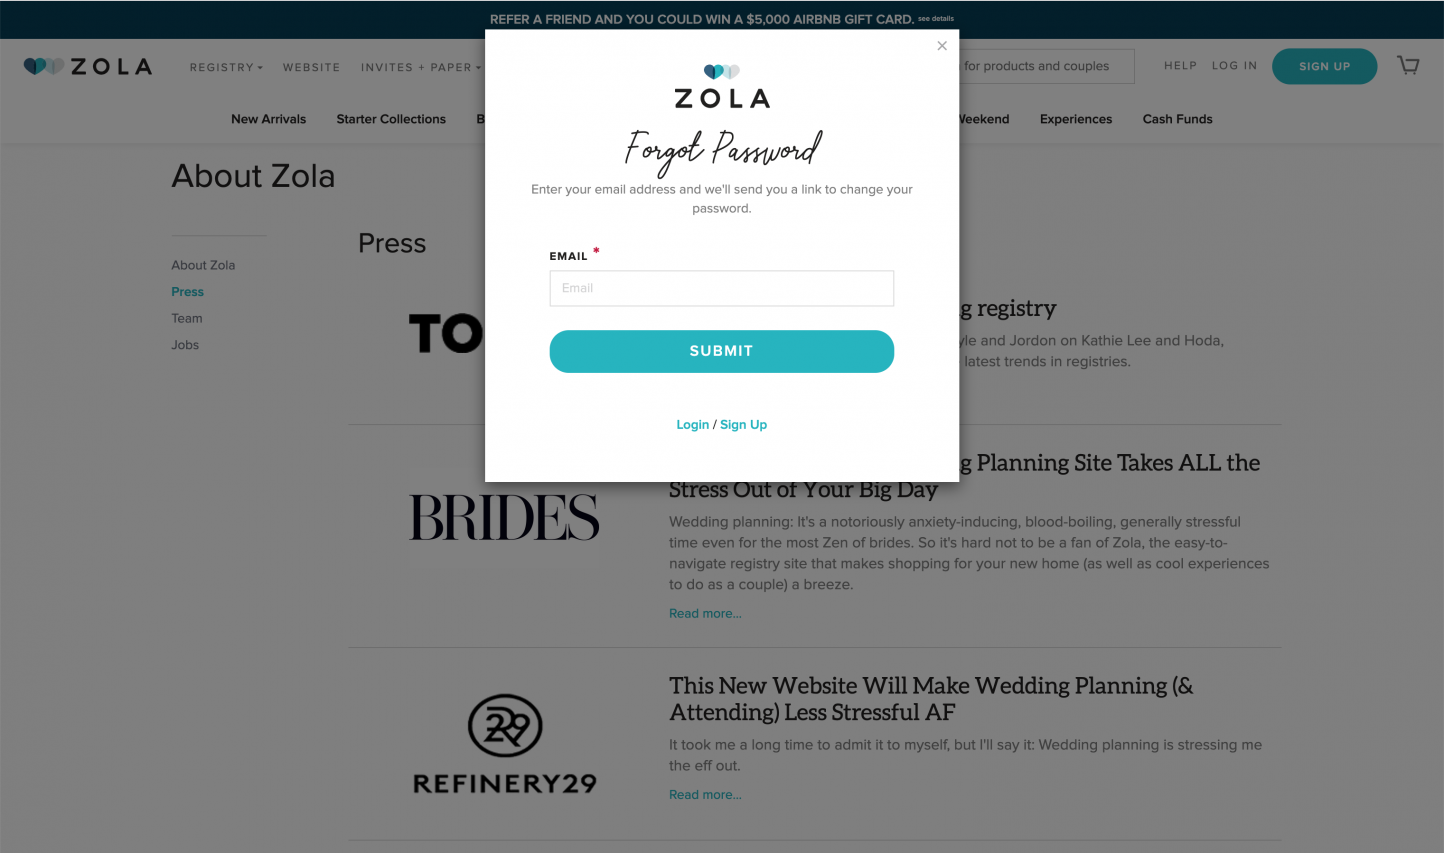 Screenshot of the Forgot Password page from the Zola website.